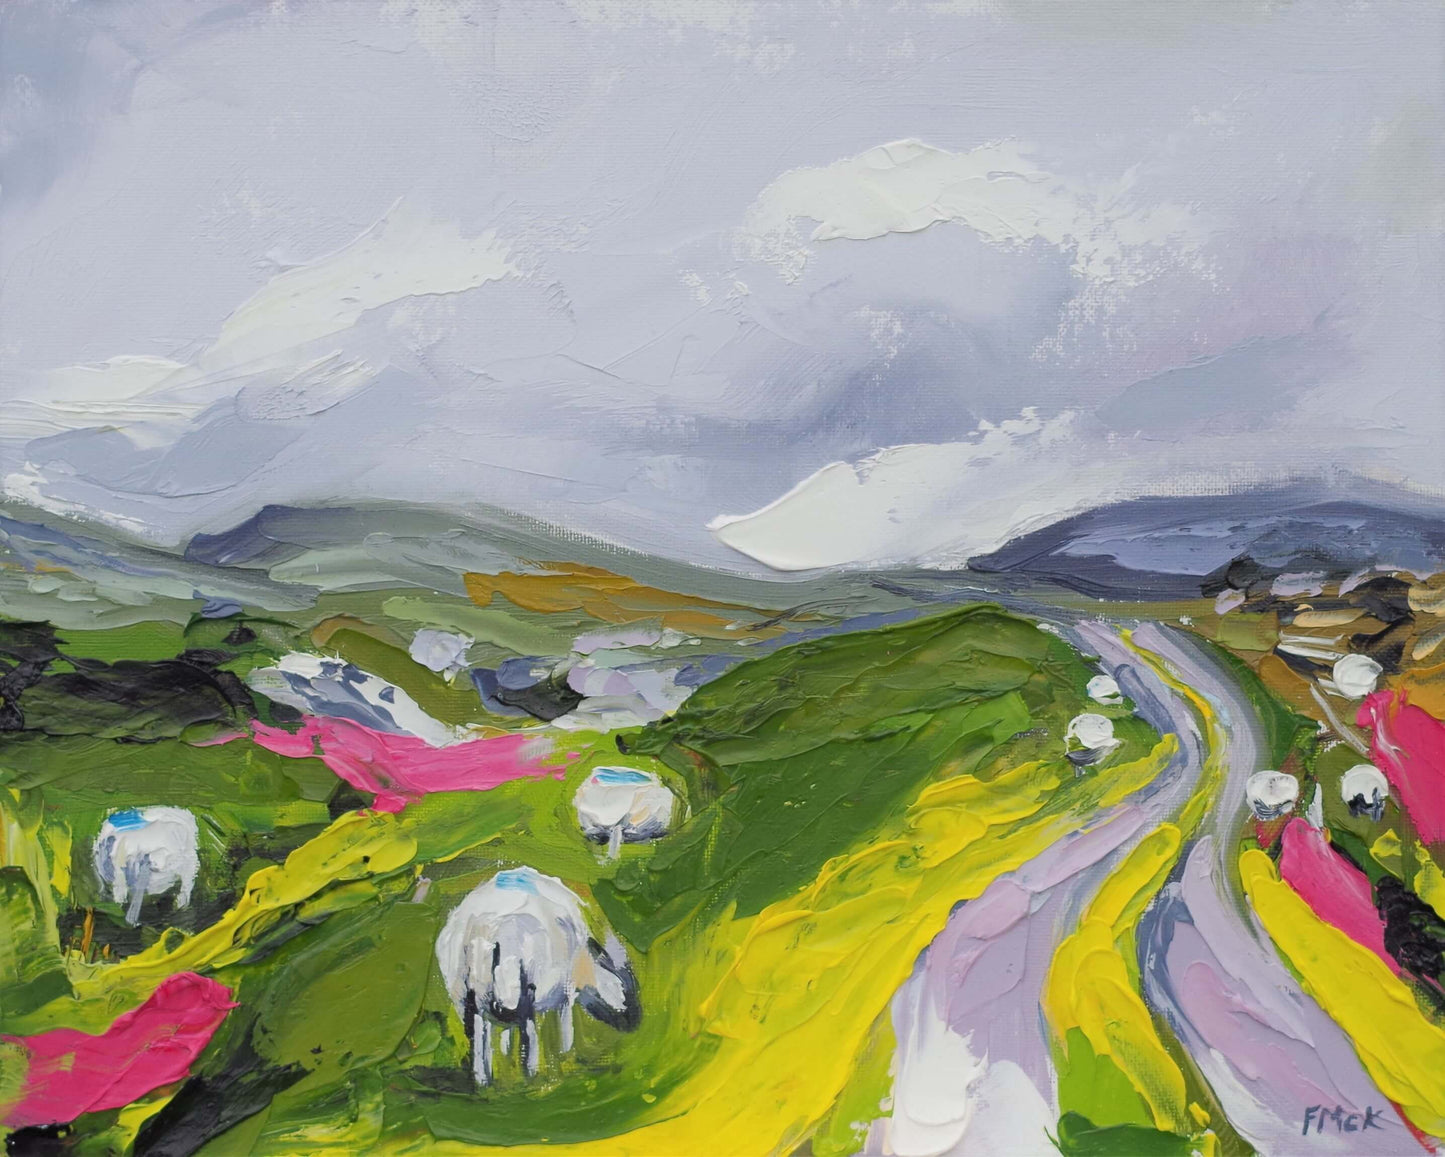 An original oil painting of a journey through the winding roads of Co. Donegal. A place to get away from it all - a place of peace and wild beauty.  8" x 10" (20cm x 25cm) on a canvas panel, unframed.